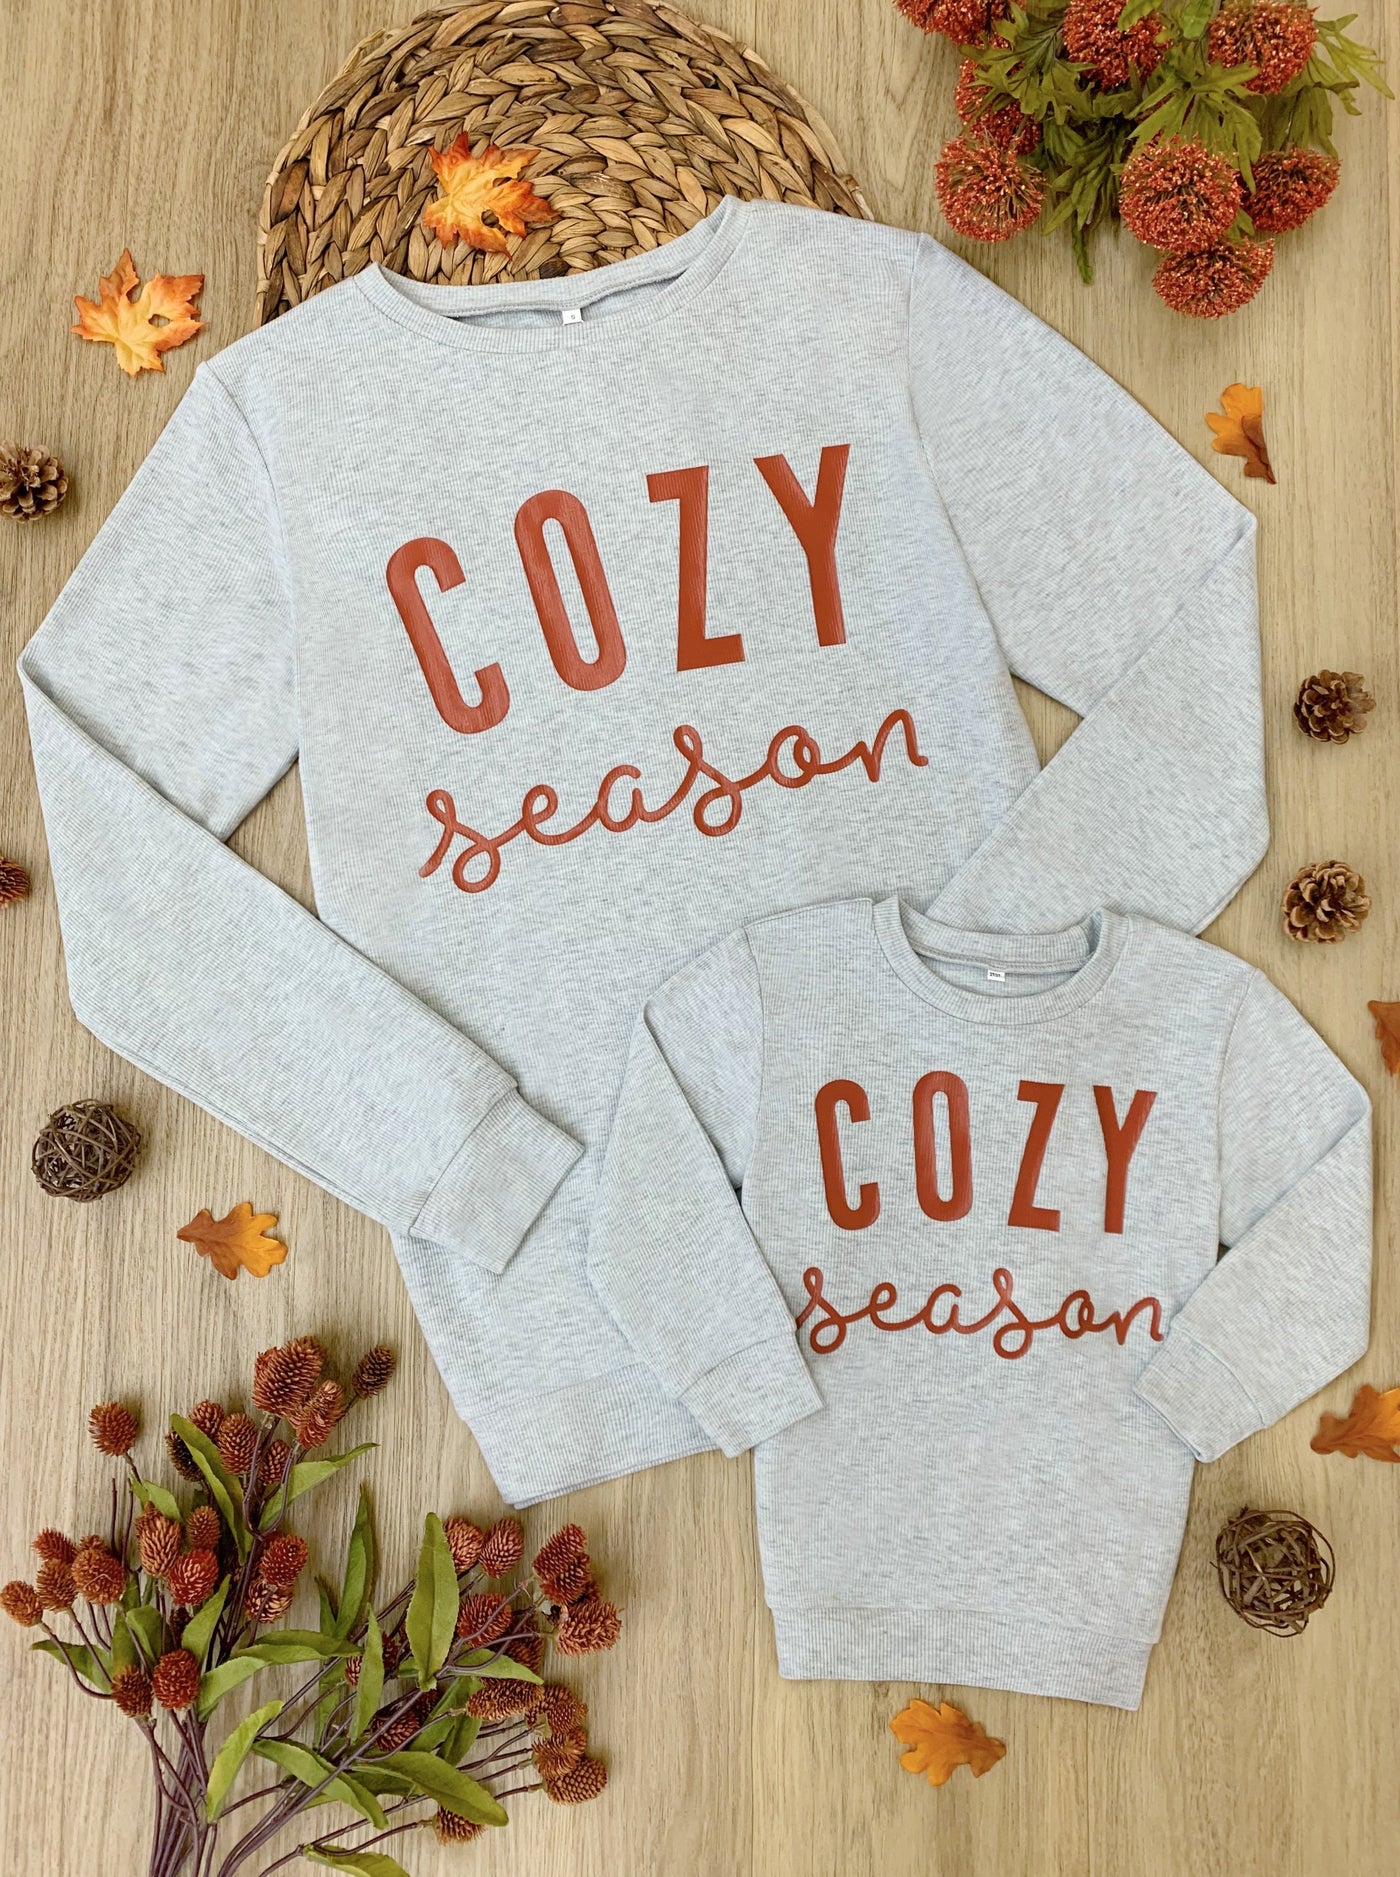 Mommy and Me Matching Outfits | Fall Pullover Sweaters | Girls Boutique